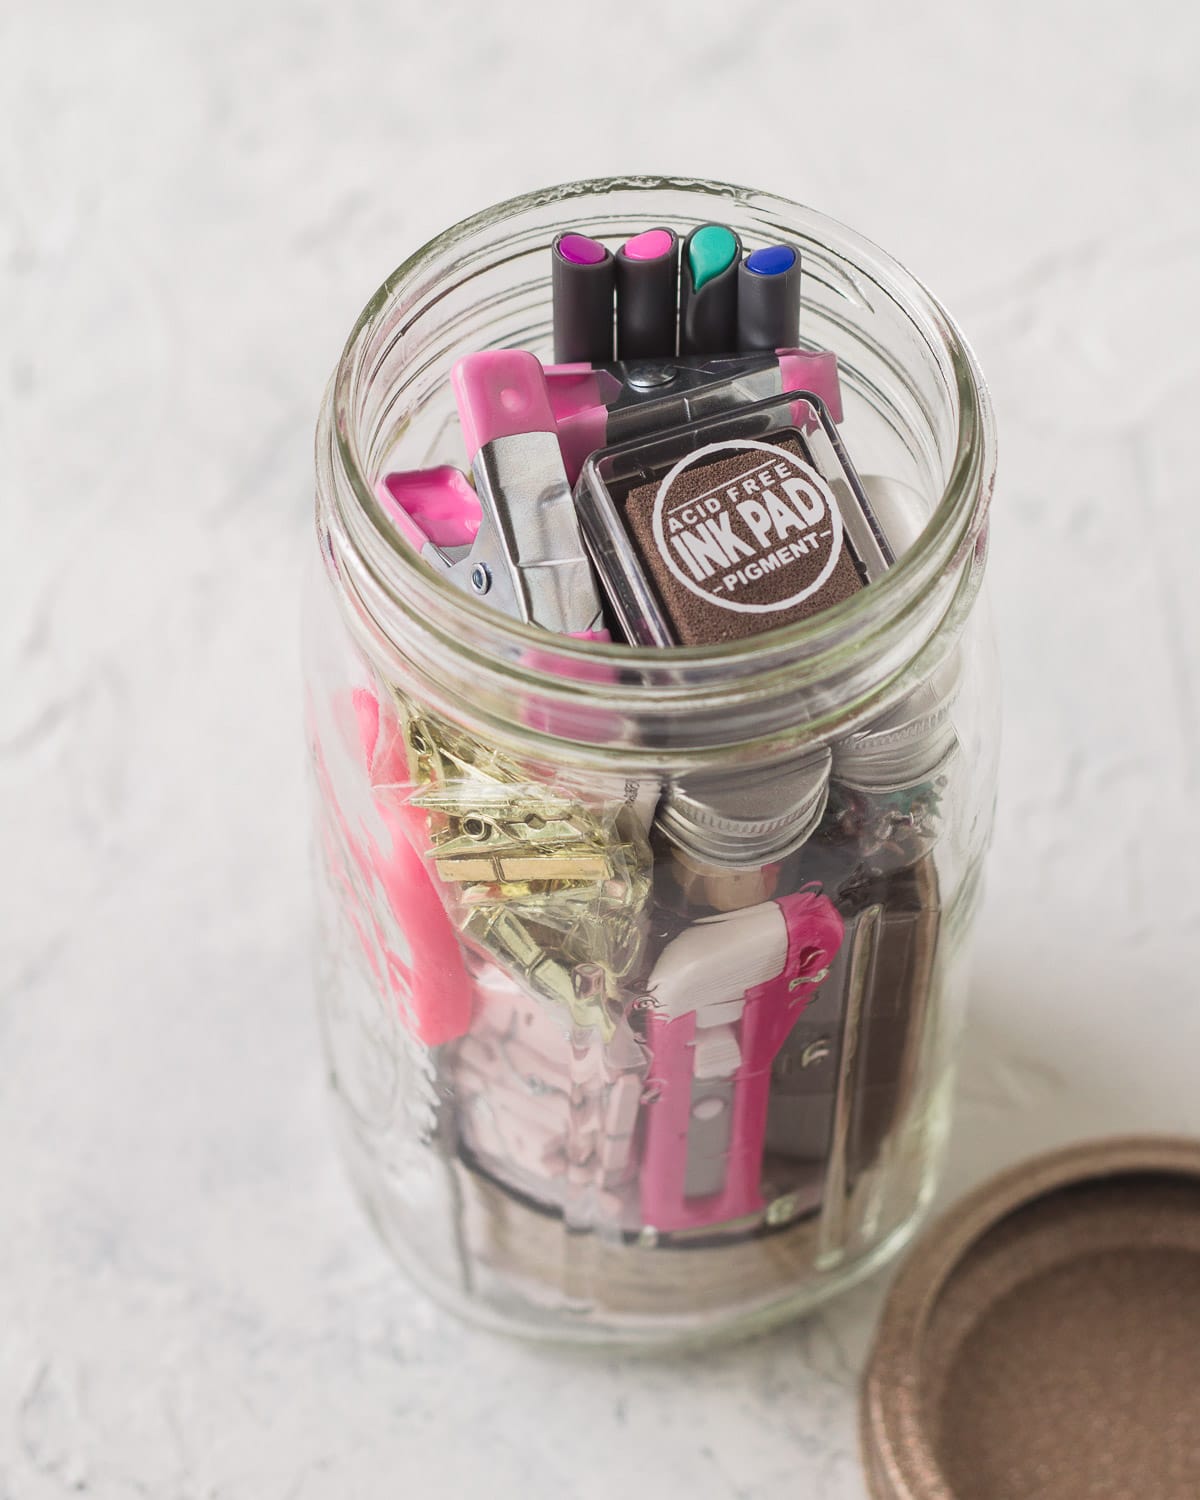 A mason jar gift filled with various craft supplies like rubber stamps and ink.